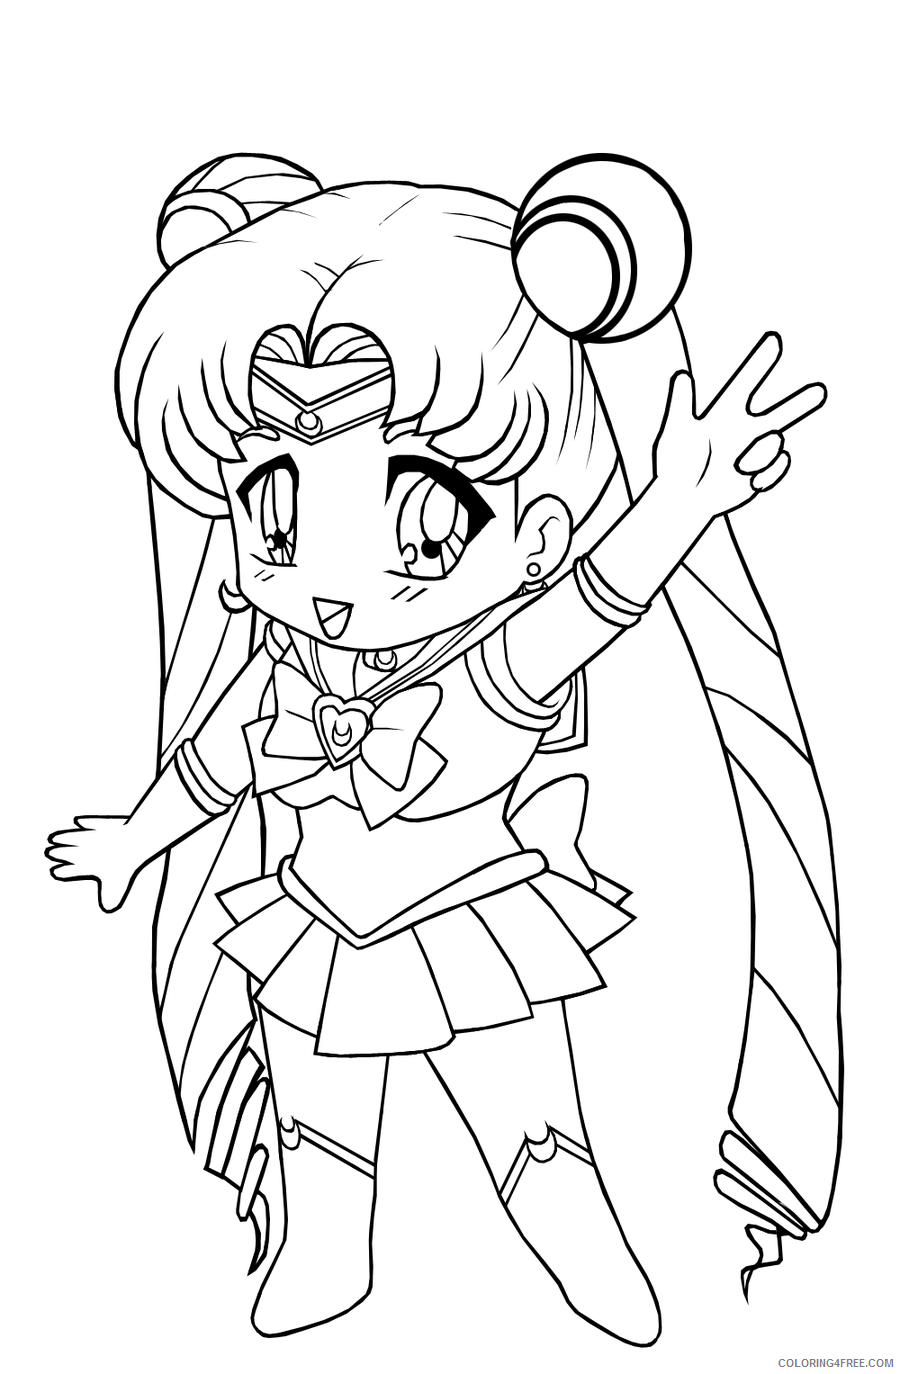 chibi sailor moon coloring pages Coloring4free